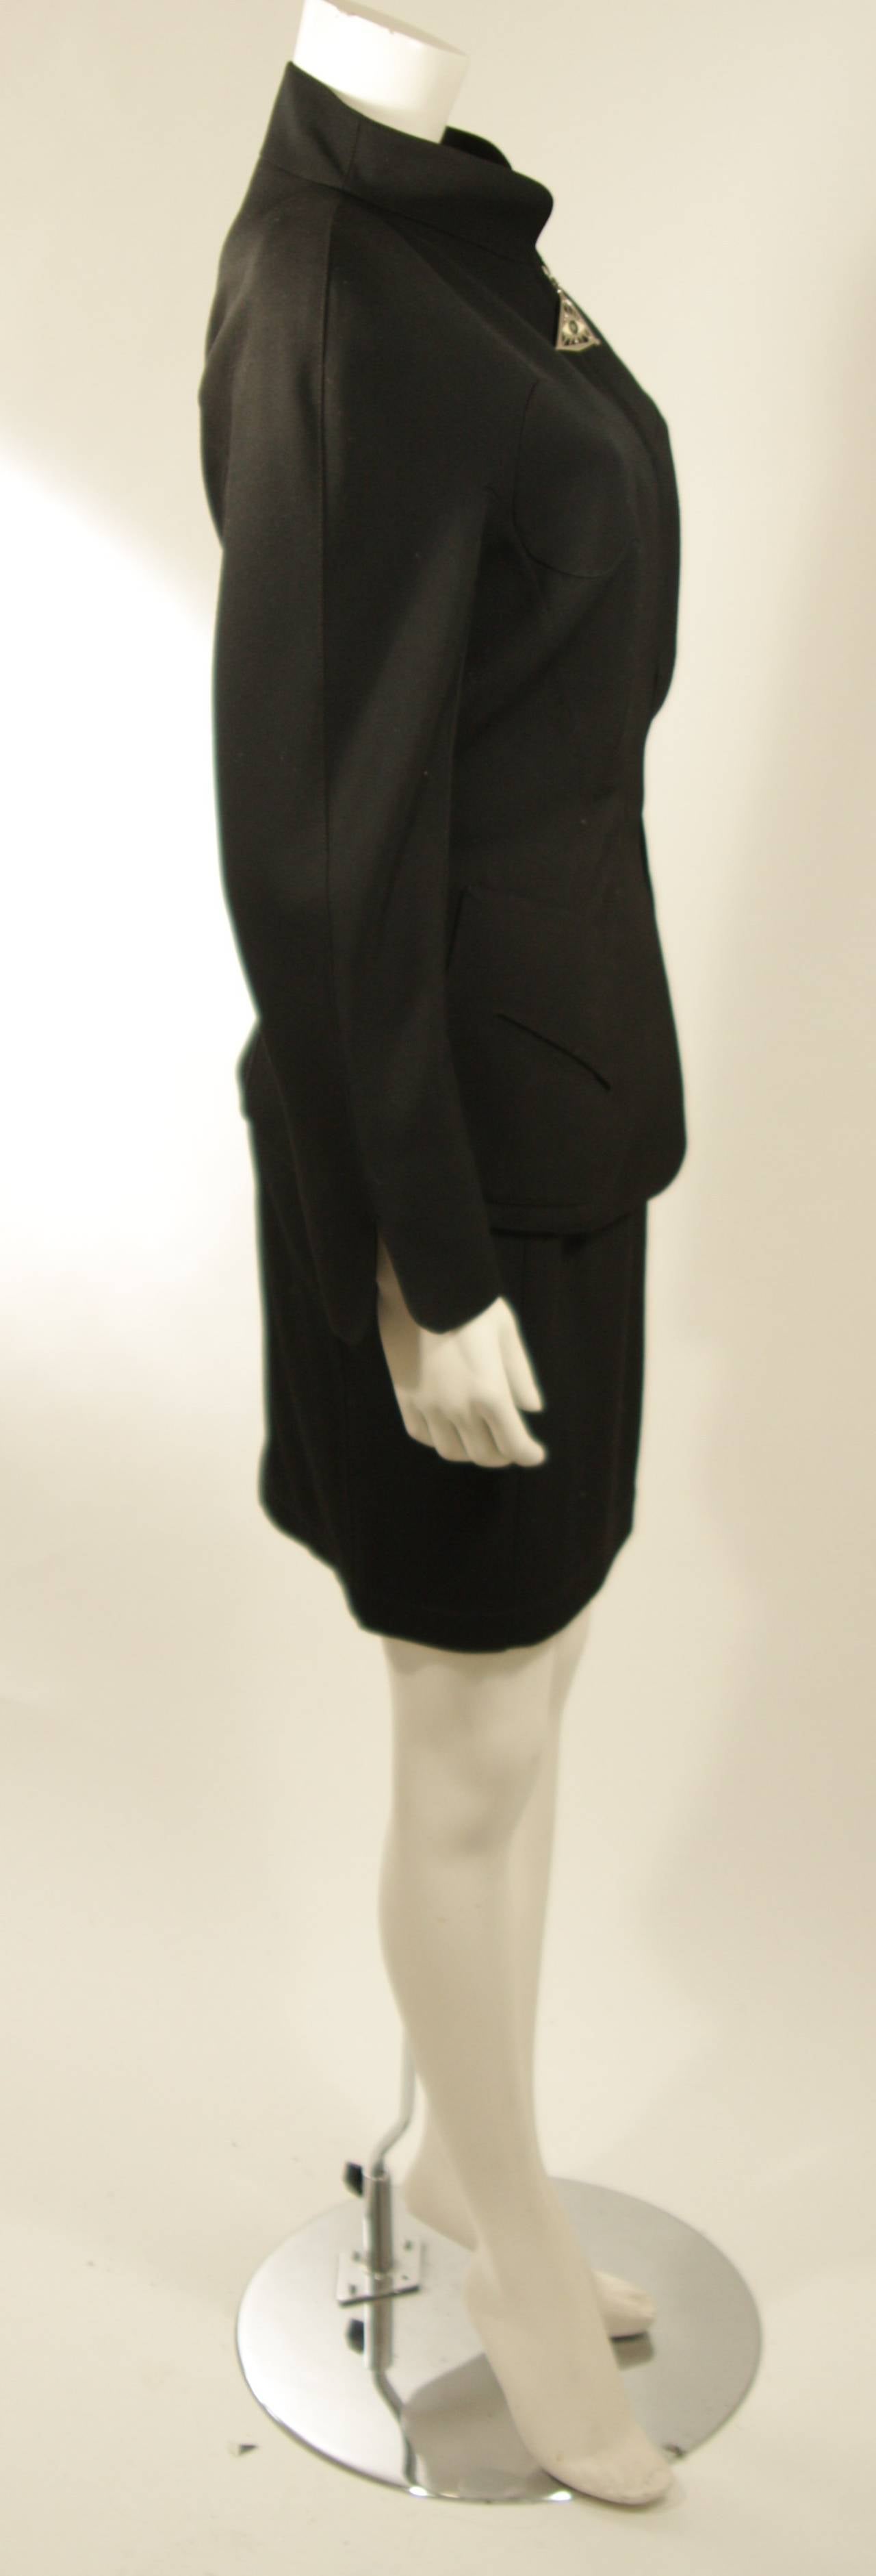 Thierry Mugler Black Skirt Suit with Pyramid Eye Zip Accent Size 44 1